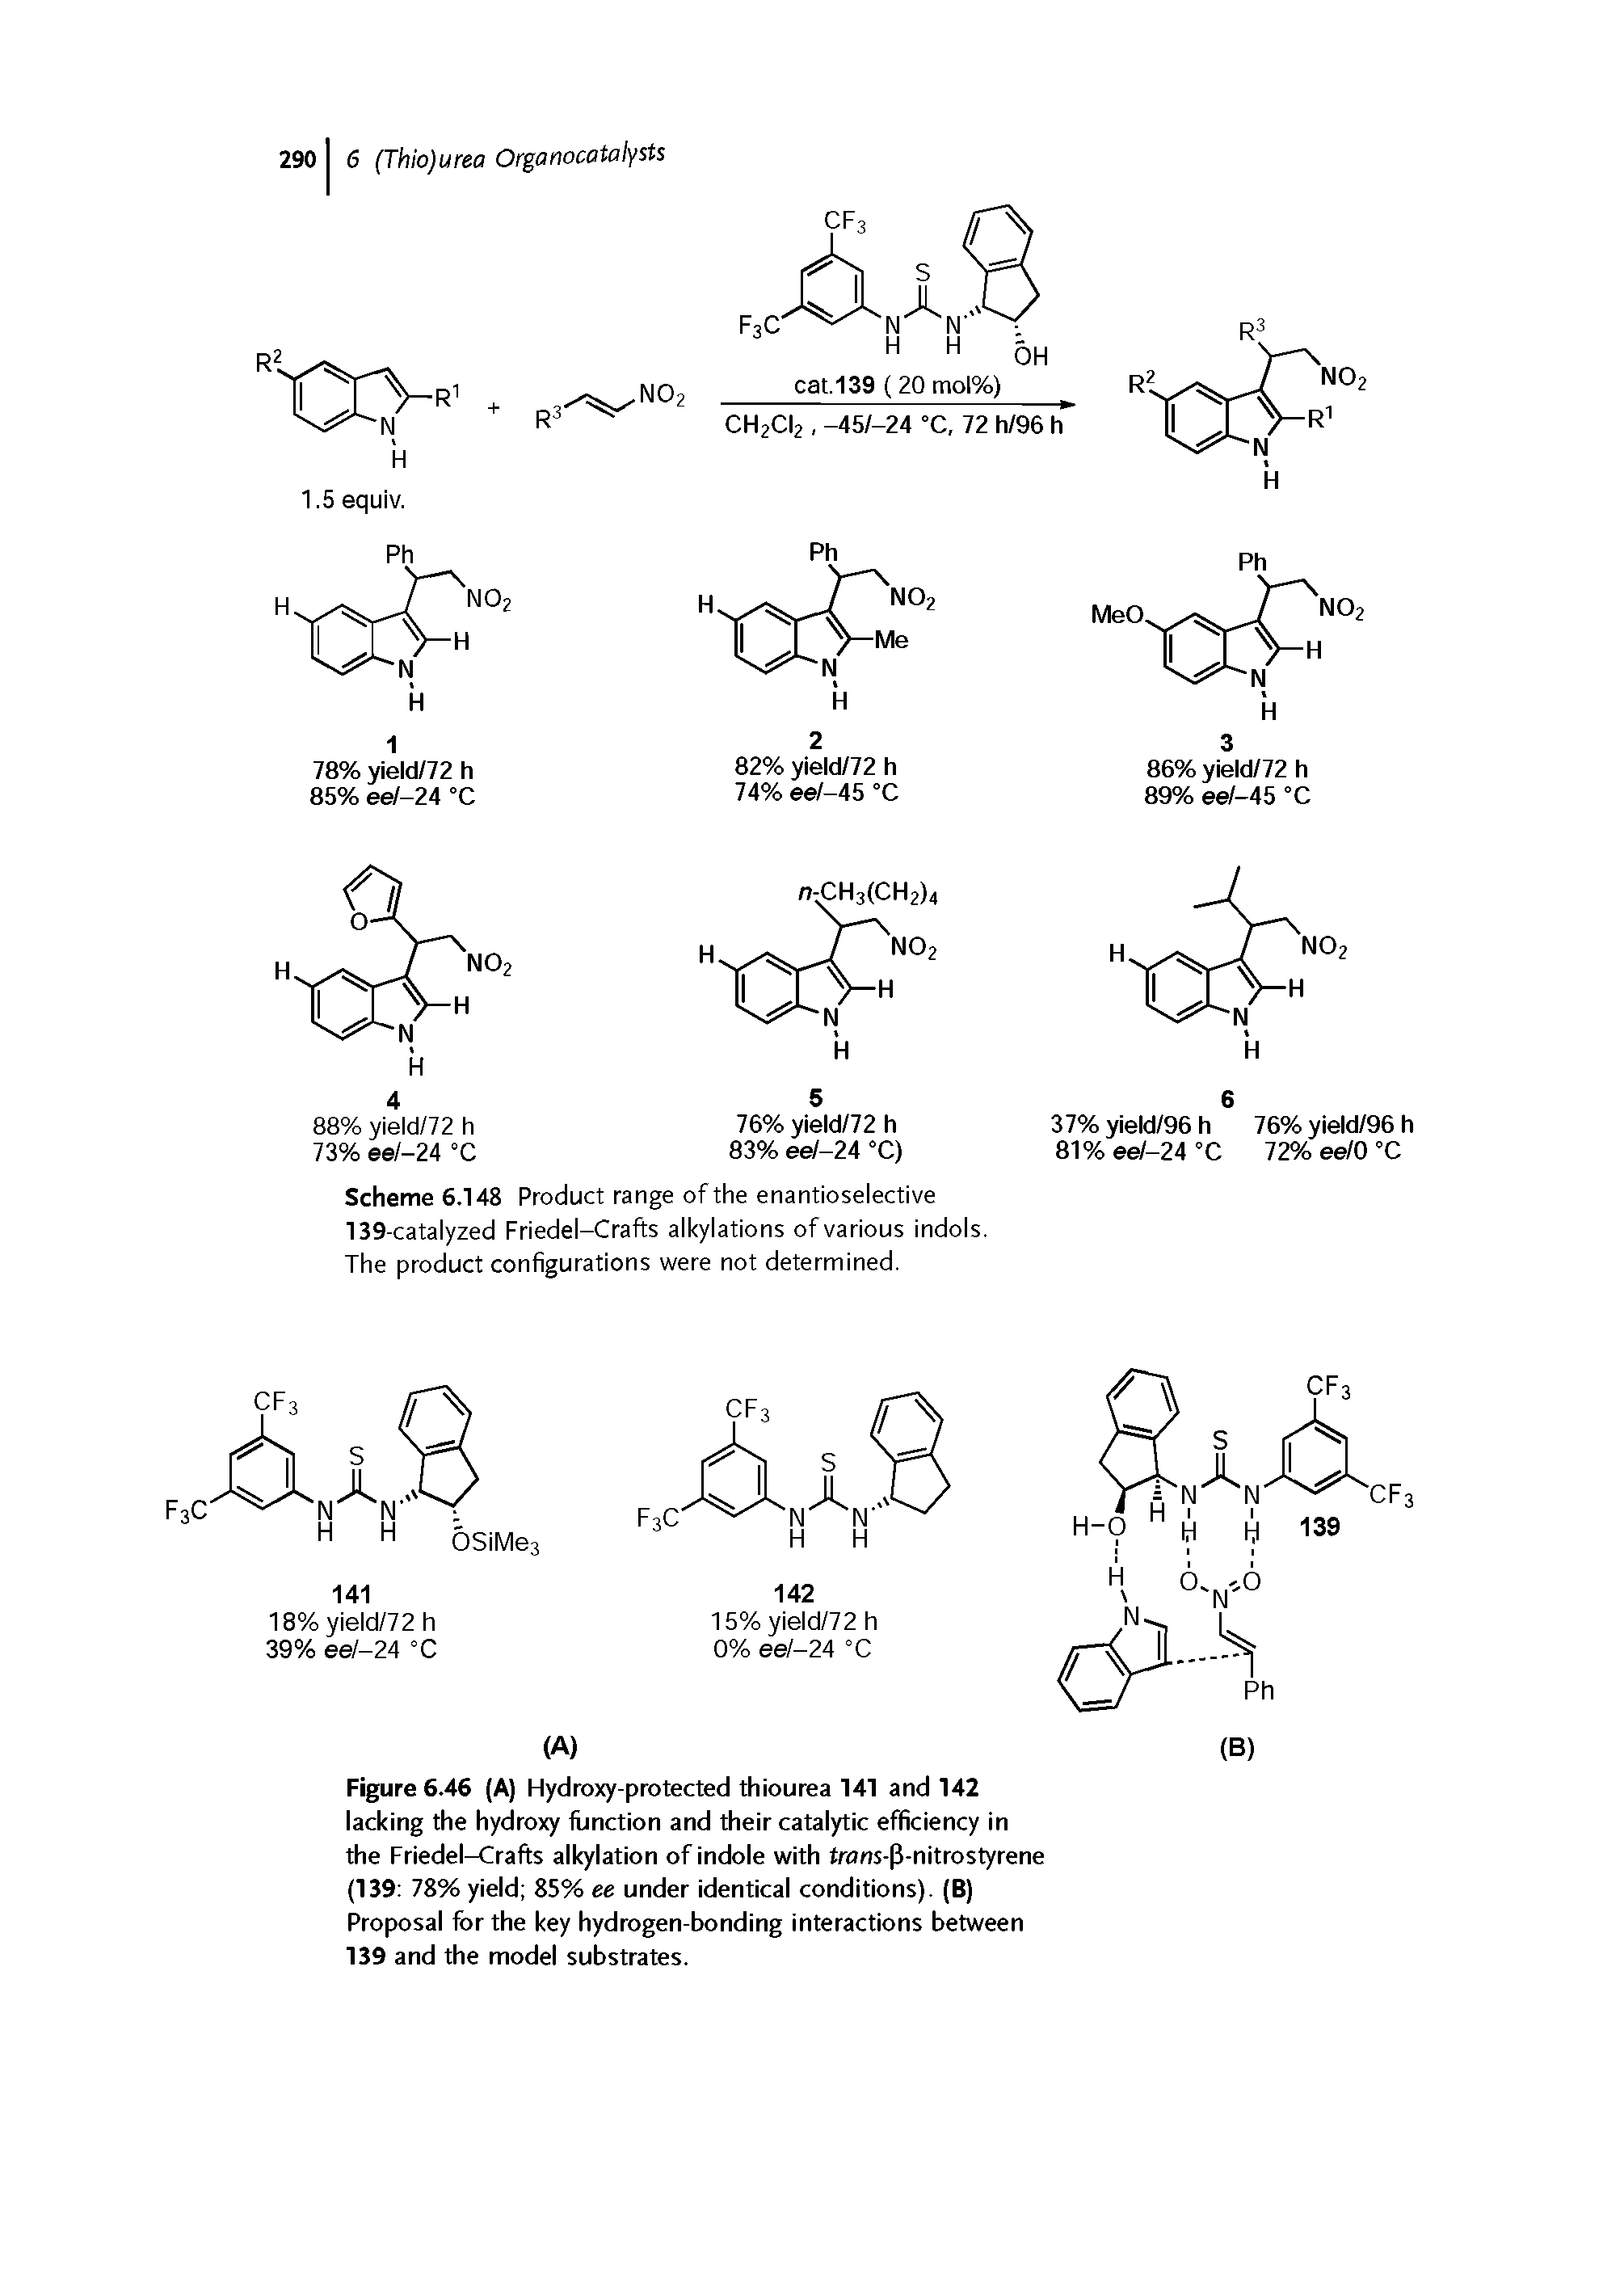 Figure 6.46 (A) Hydroxy-protected thiourea 141 and 142 lacking the hydroxy function and their catalytic efficiency in the Friedel-Crafts alkylation of indole with frans-P-nitrostyrene (139 78% yield 85% ee under identical conditions). (B) Proposal for the key hydrogen-bonding interactions between 139 and the model substrates.